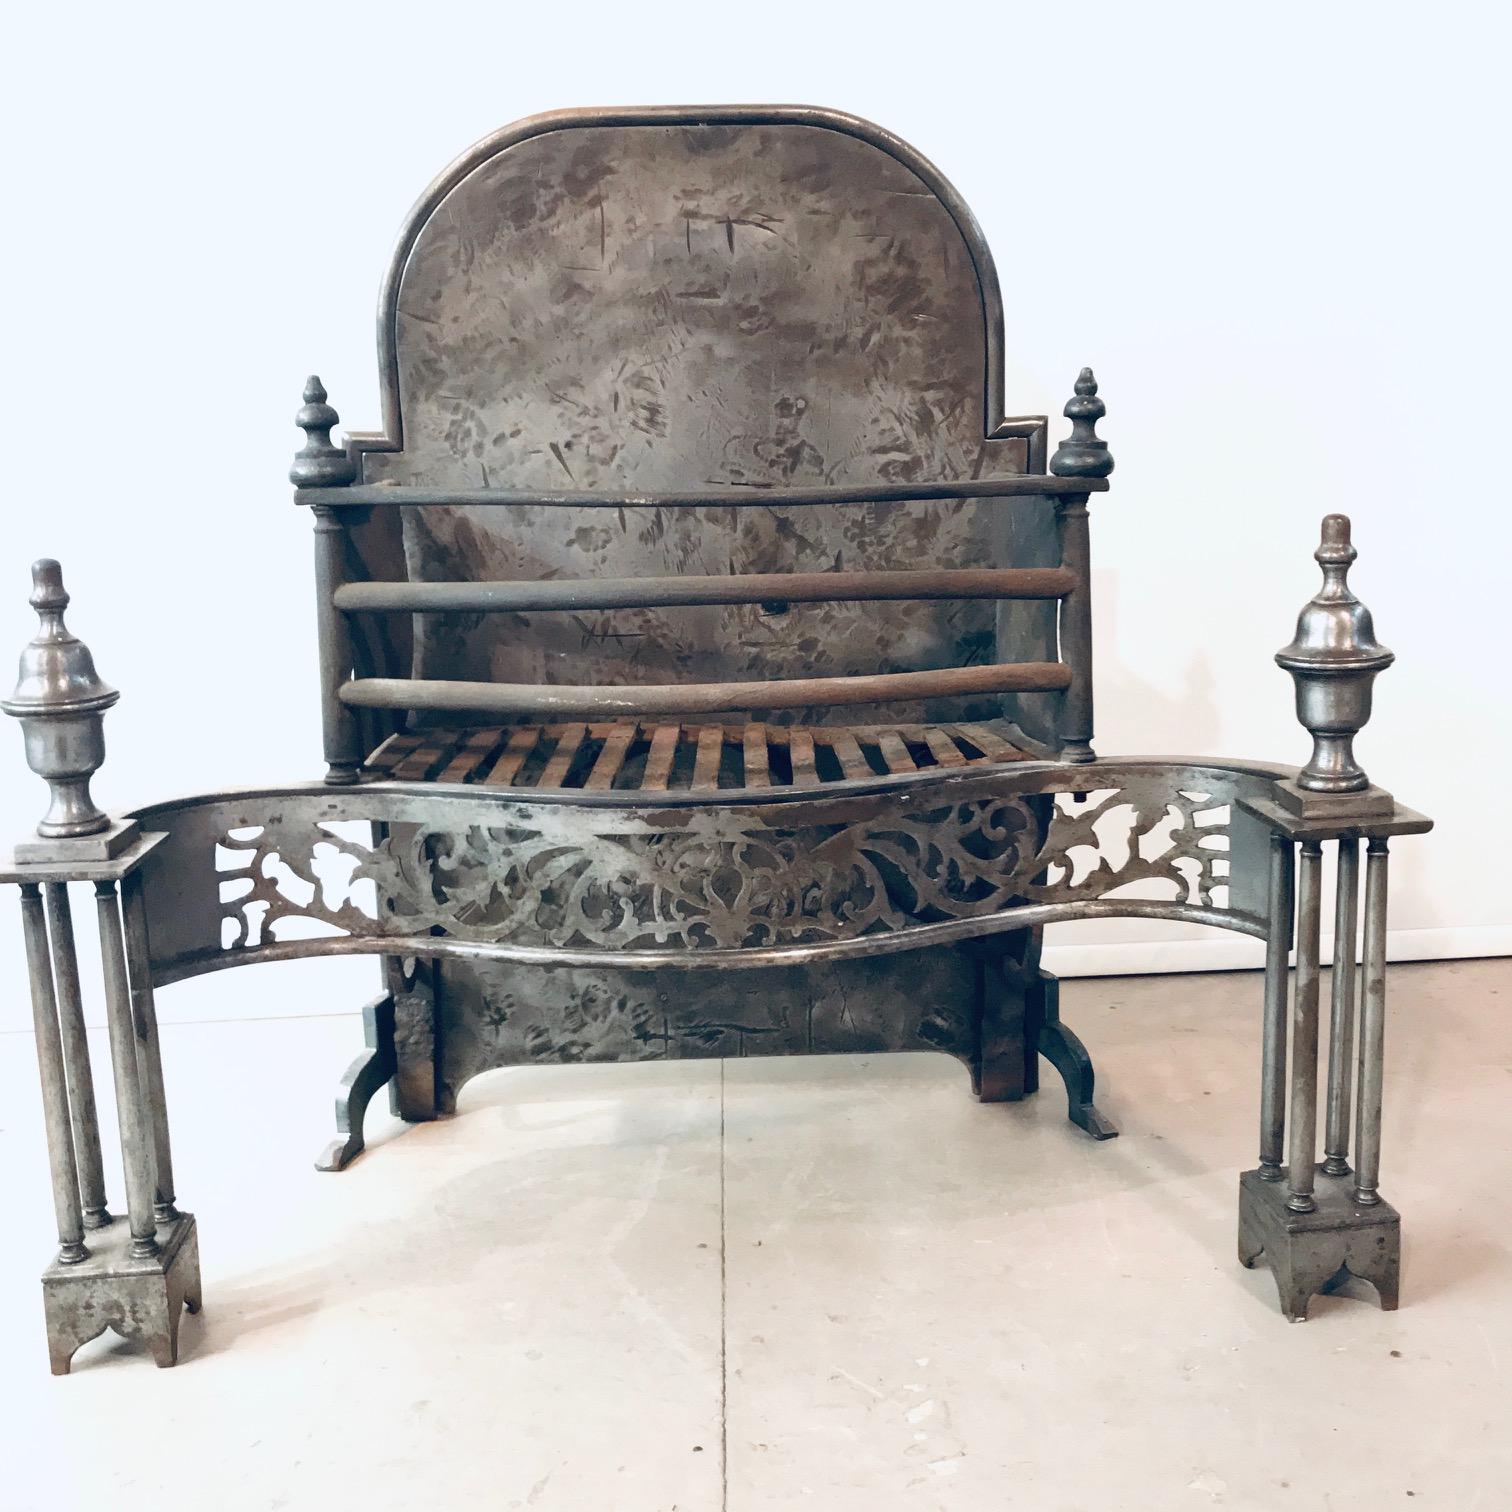 This fine grate is an ideal size for domestic use. The serpentine shape is especially desirable. The fire basket is flanked by a pair of columnar pedestals with large finials, and has a beautiful applied frieze with pierced cutwork decoration.